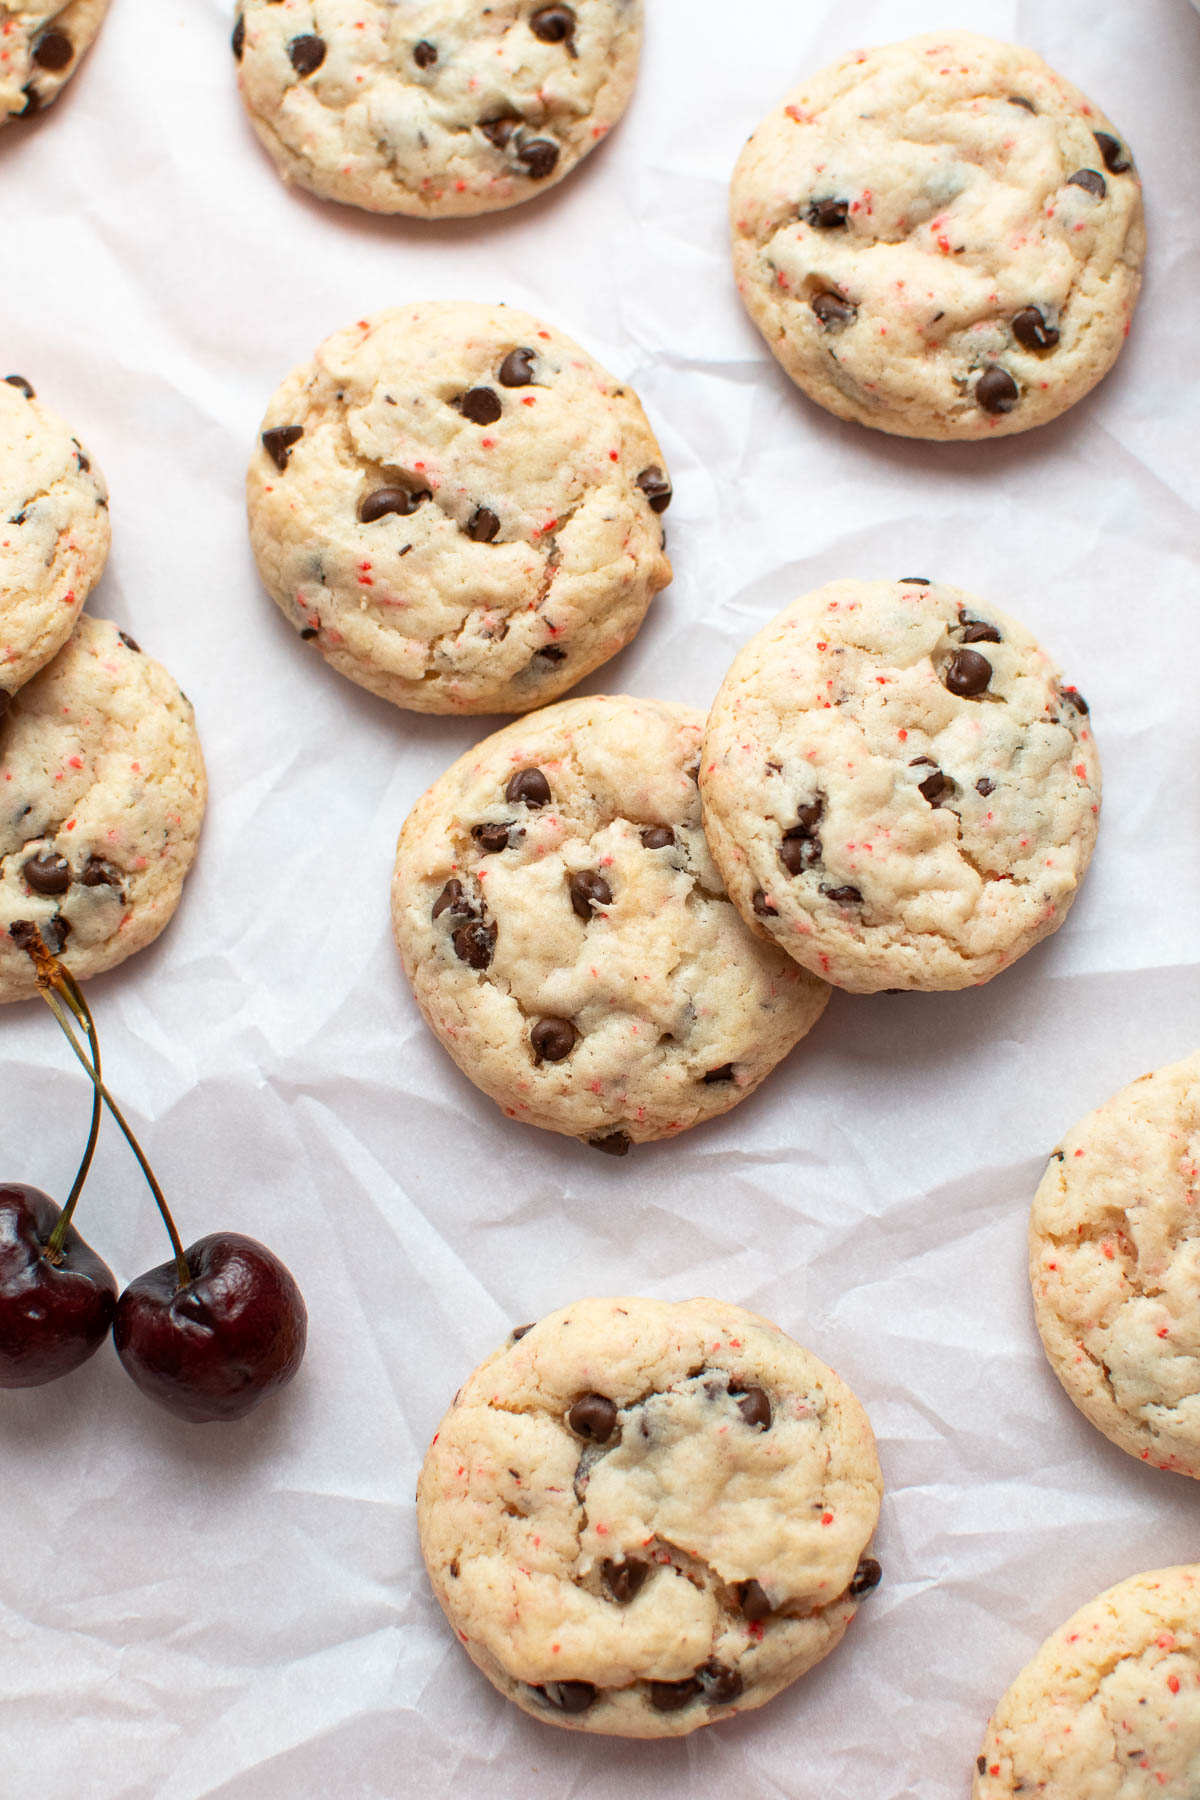 Cherry chip chocolate chip cookies on parchment paper with fresh cherries nearby.